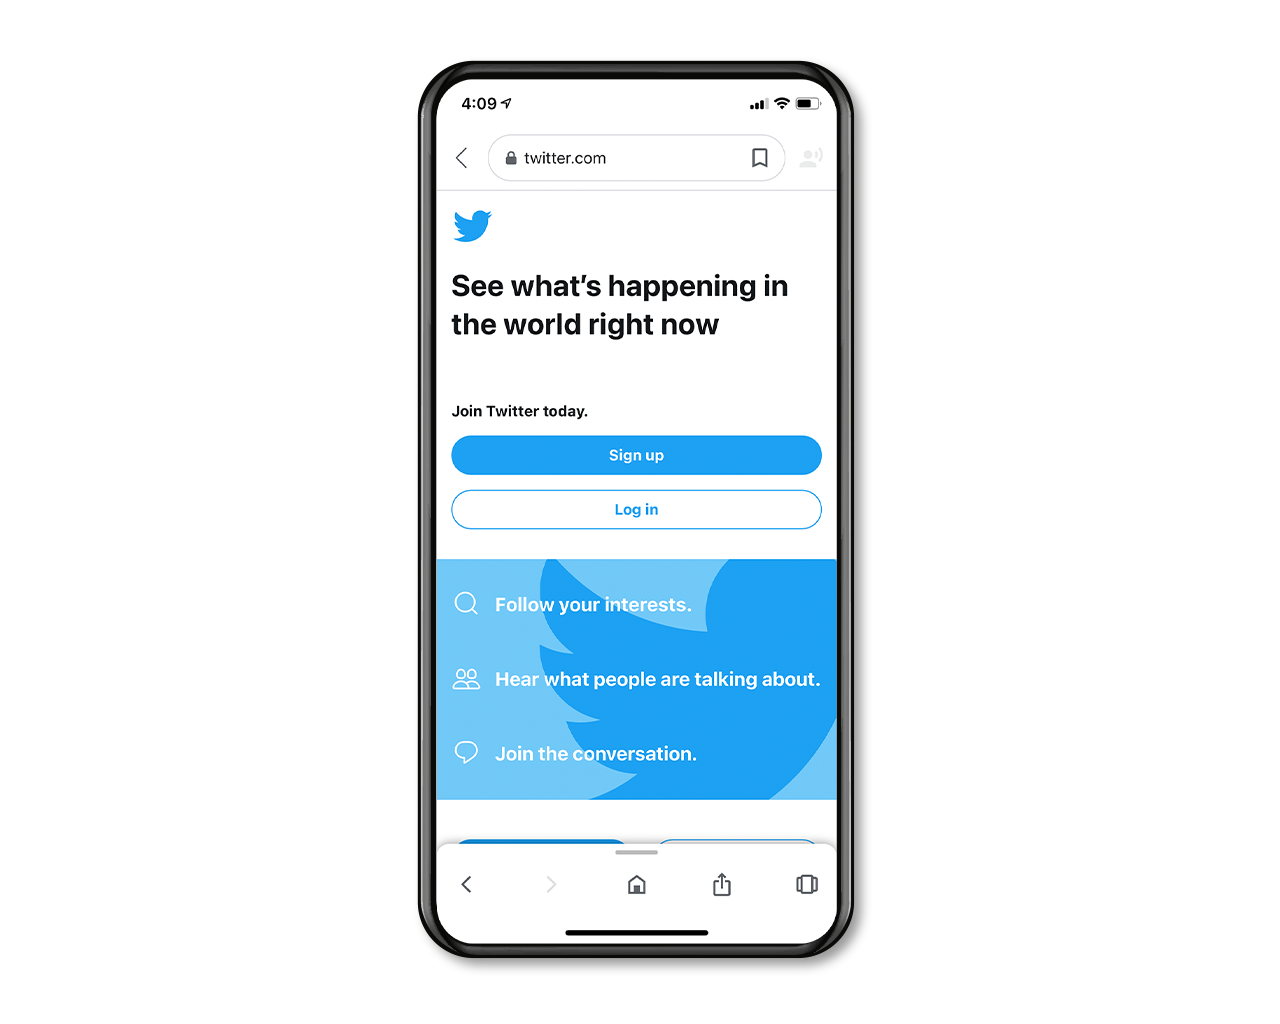 The Twitter sign up page on a mobile phone